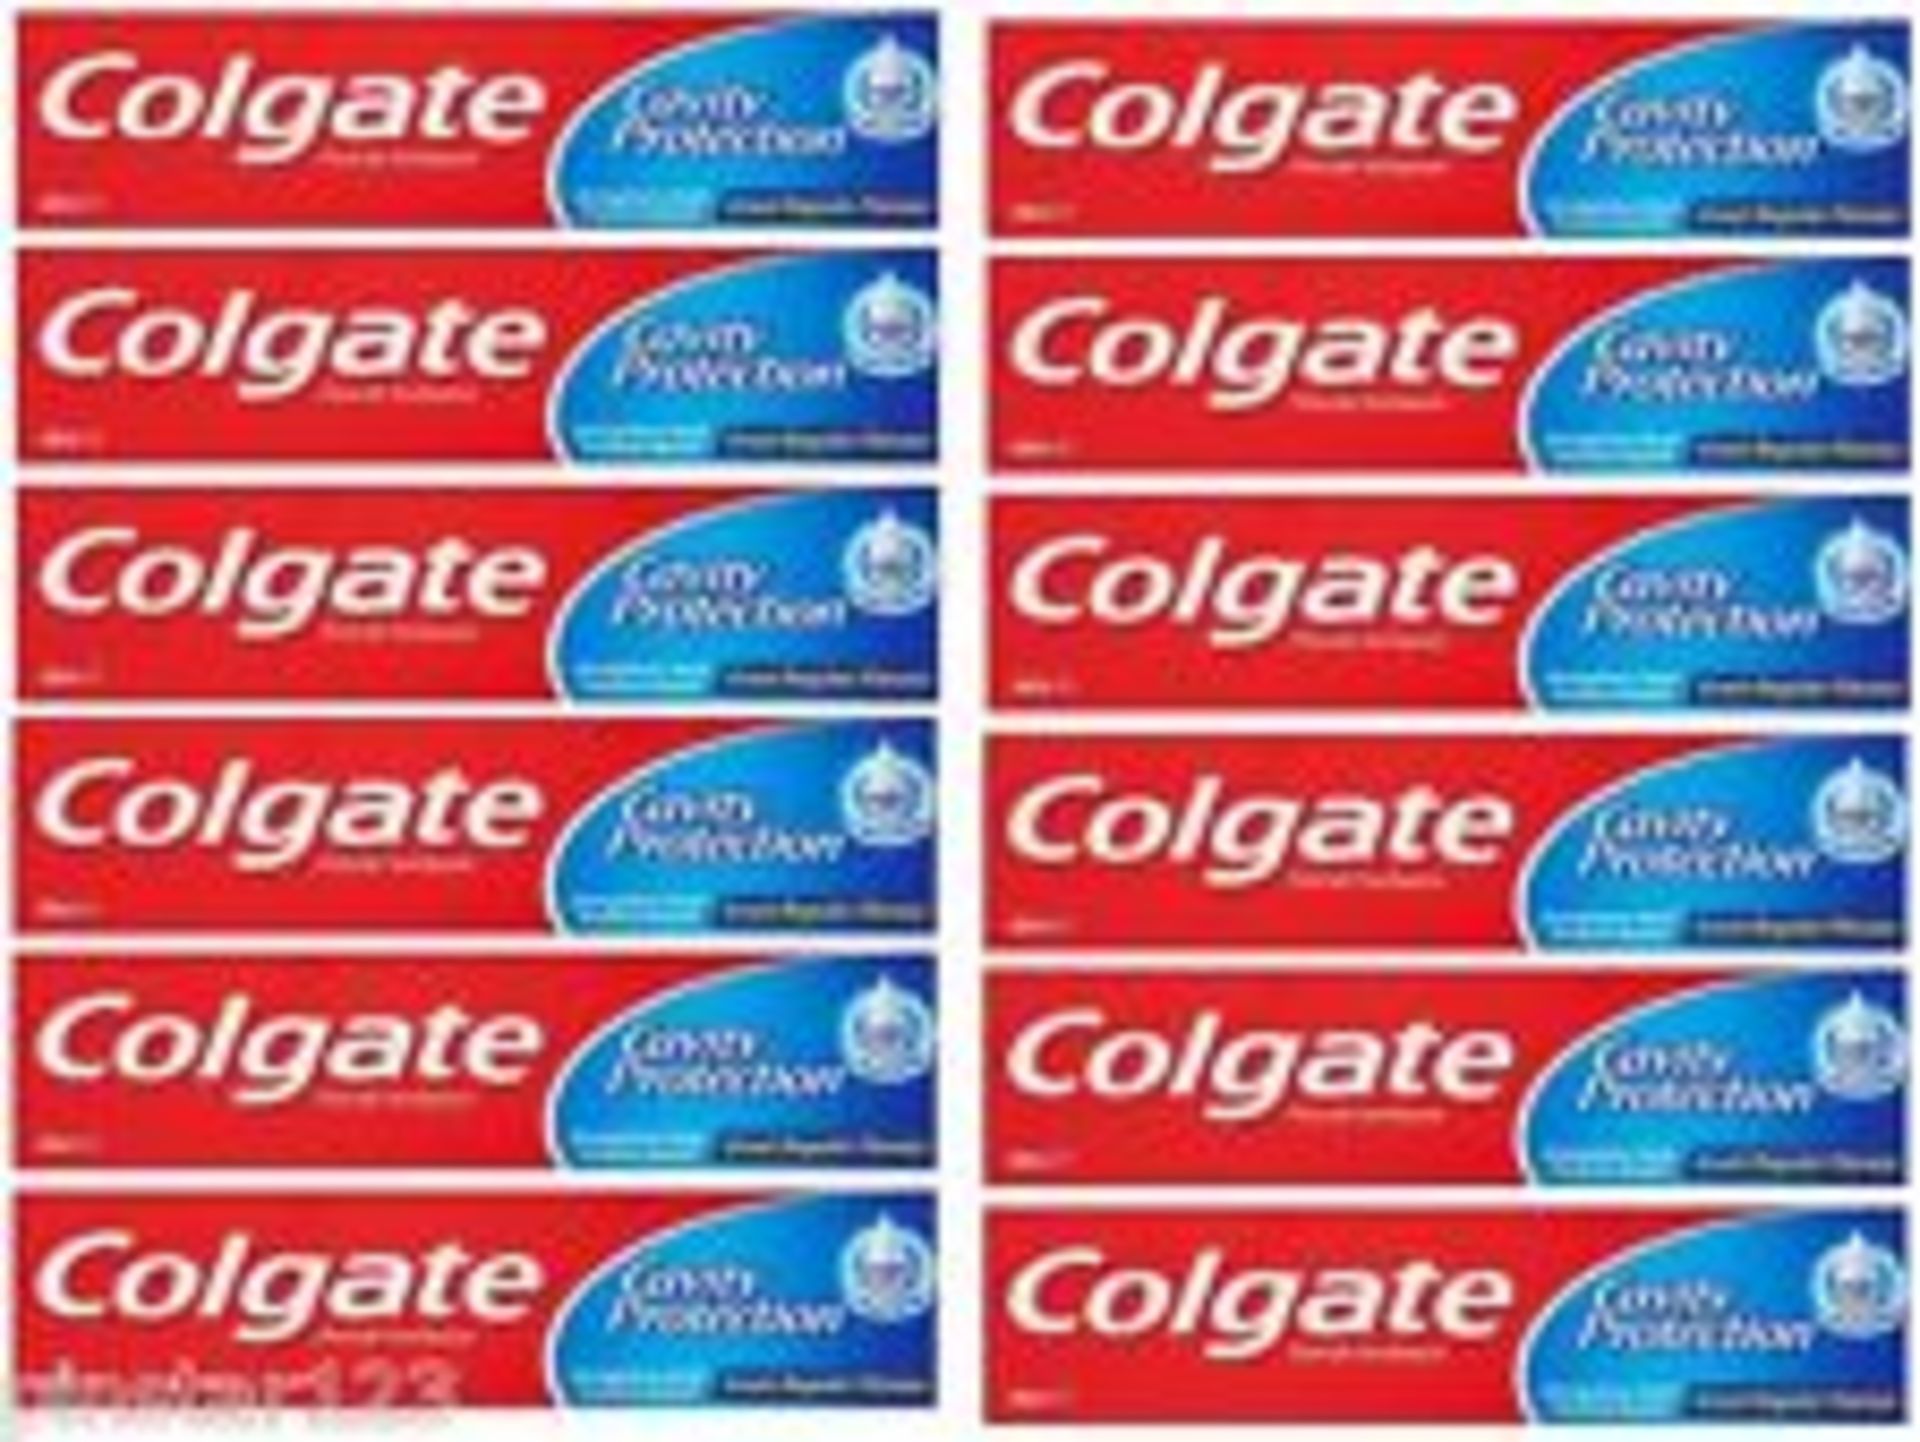 V *TRADE QTY* Brand New 12 x Colgate Toothpaste Deep Clean Whitening 100ml Total Superdrug Price £